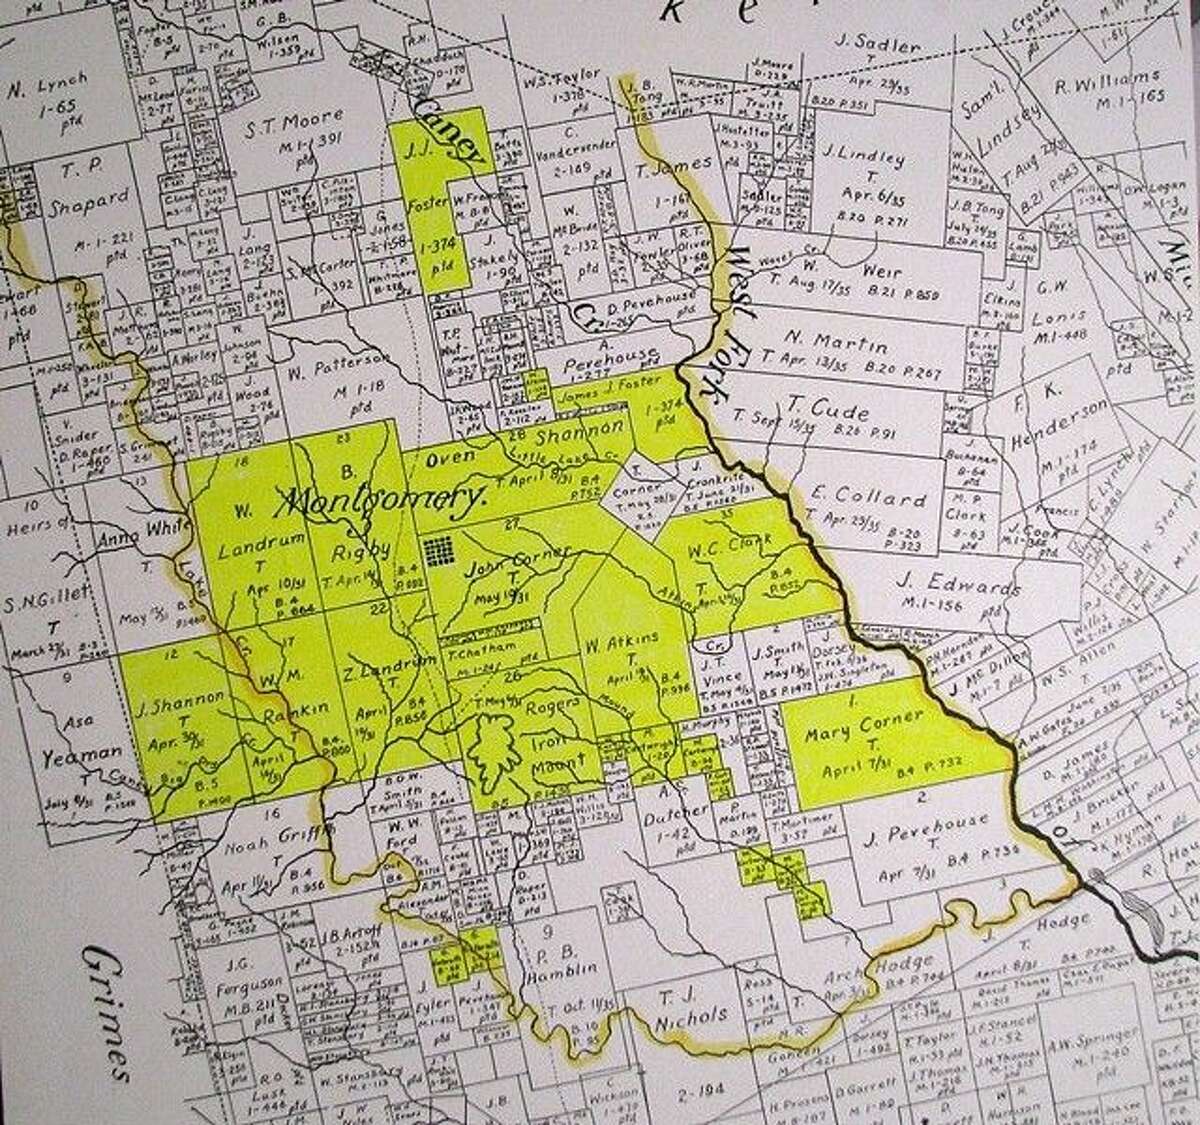 This map from 1861 shows the Lake Creek Settlement. It was bordered on the east by the West Fork of the San Jacinto River and on the west by Lake Creek. The yellow highlights indicate original leagues of land within the settlement. Early colonists came to this area in the 1830s and the town of Montgomery was later formed in the Lake Creek Settlement.